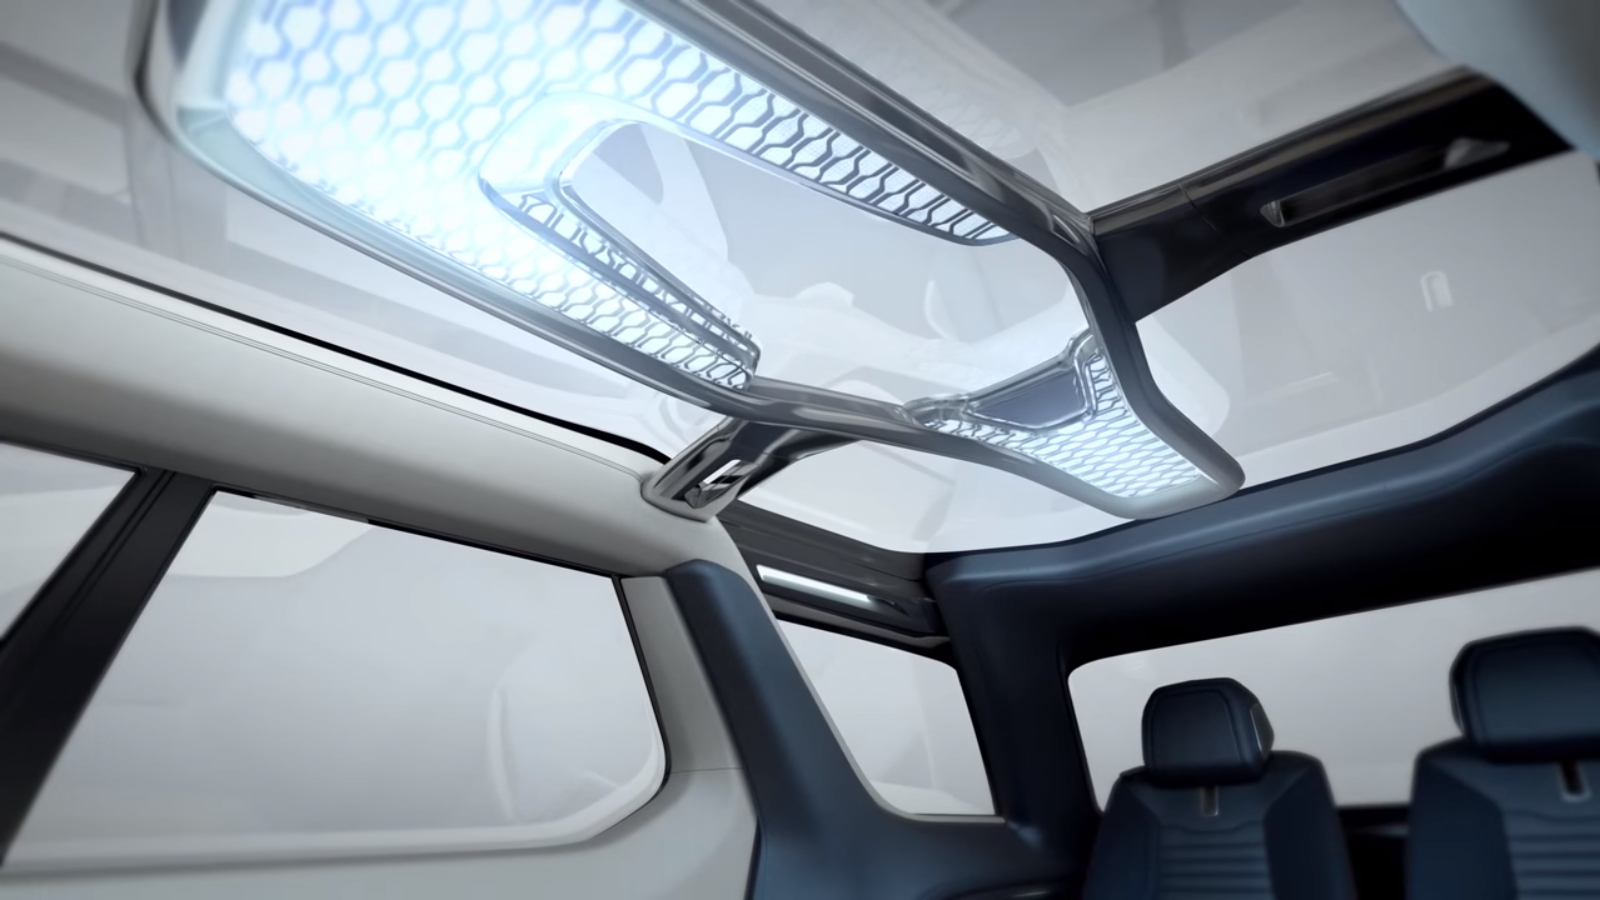 Land Rover New Discovery Vision interior lighting view